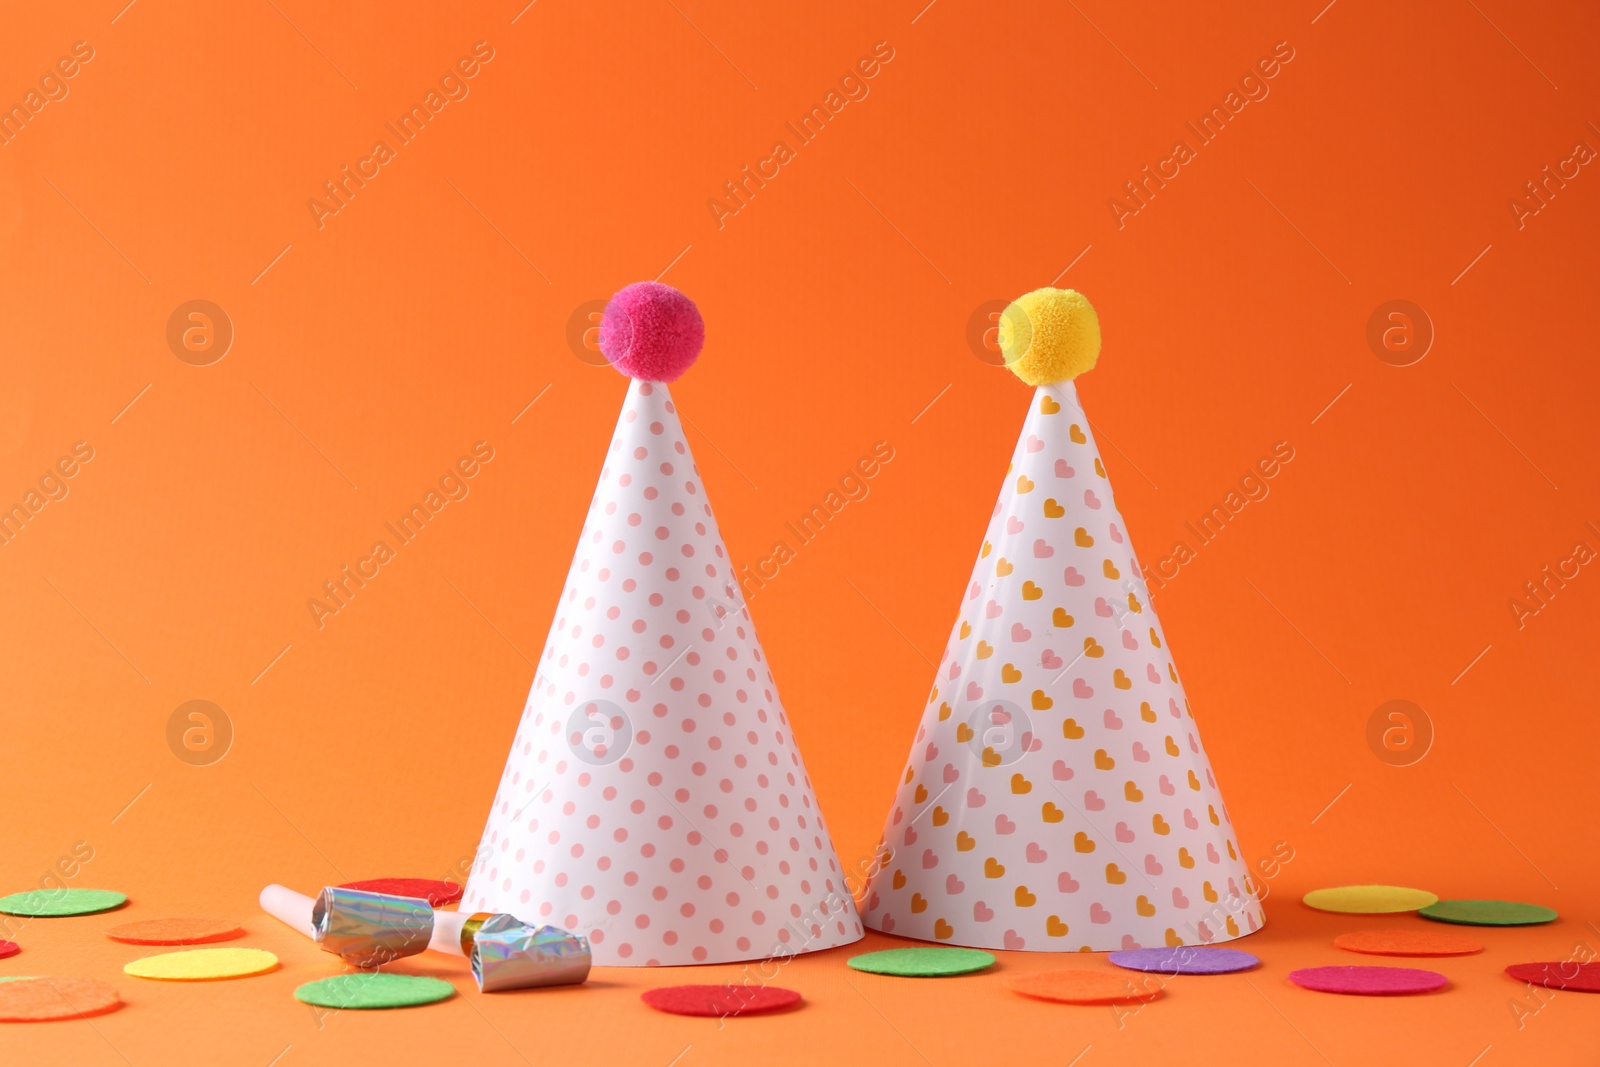 Photo of Party hats and other bright decor elements on orange background